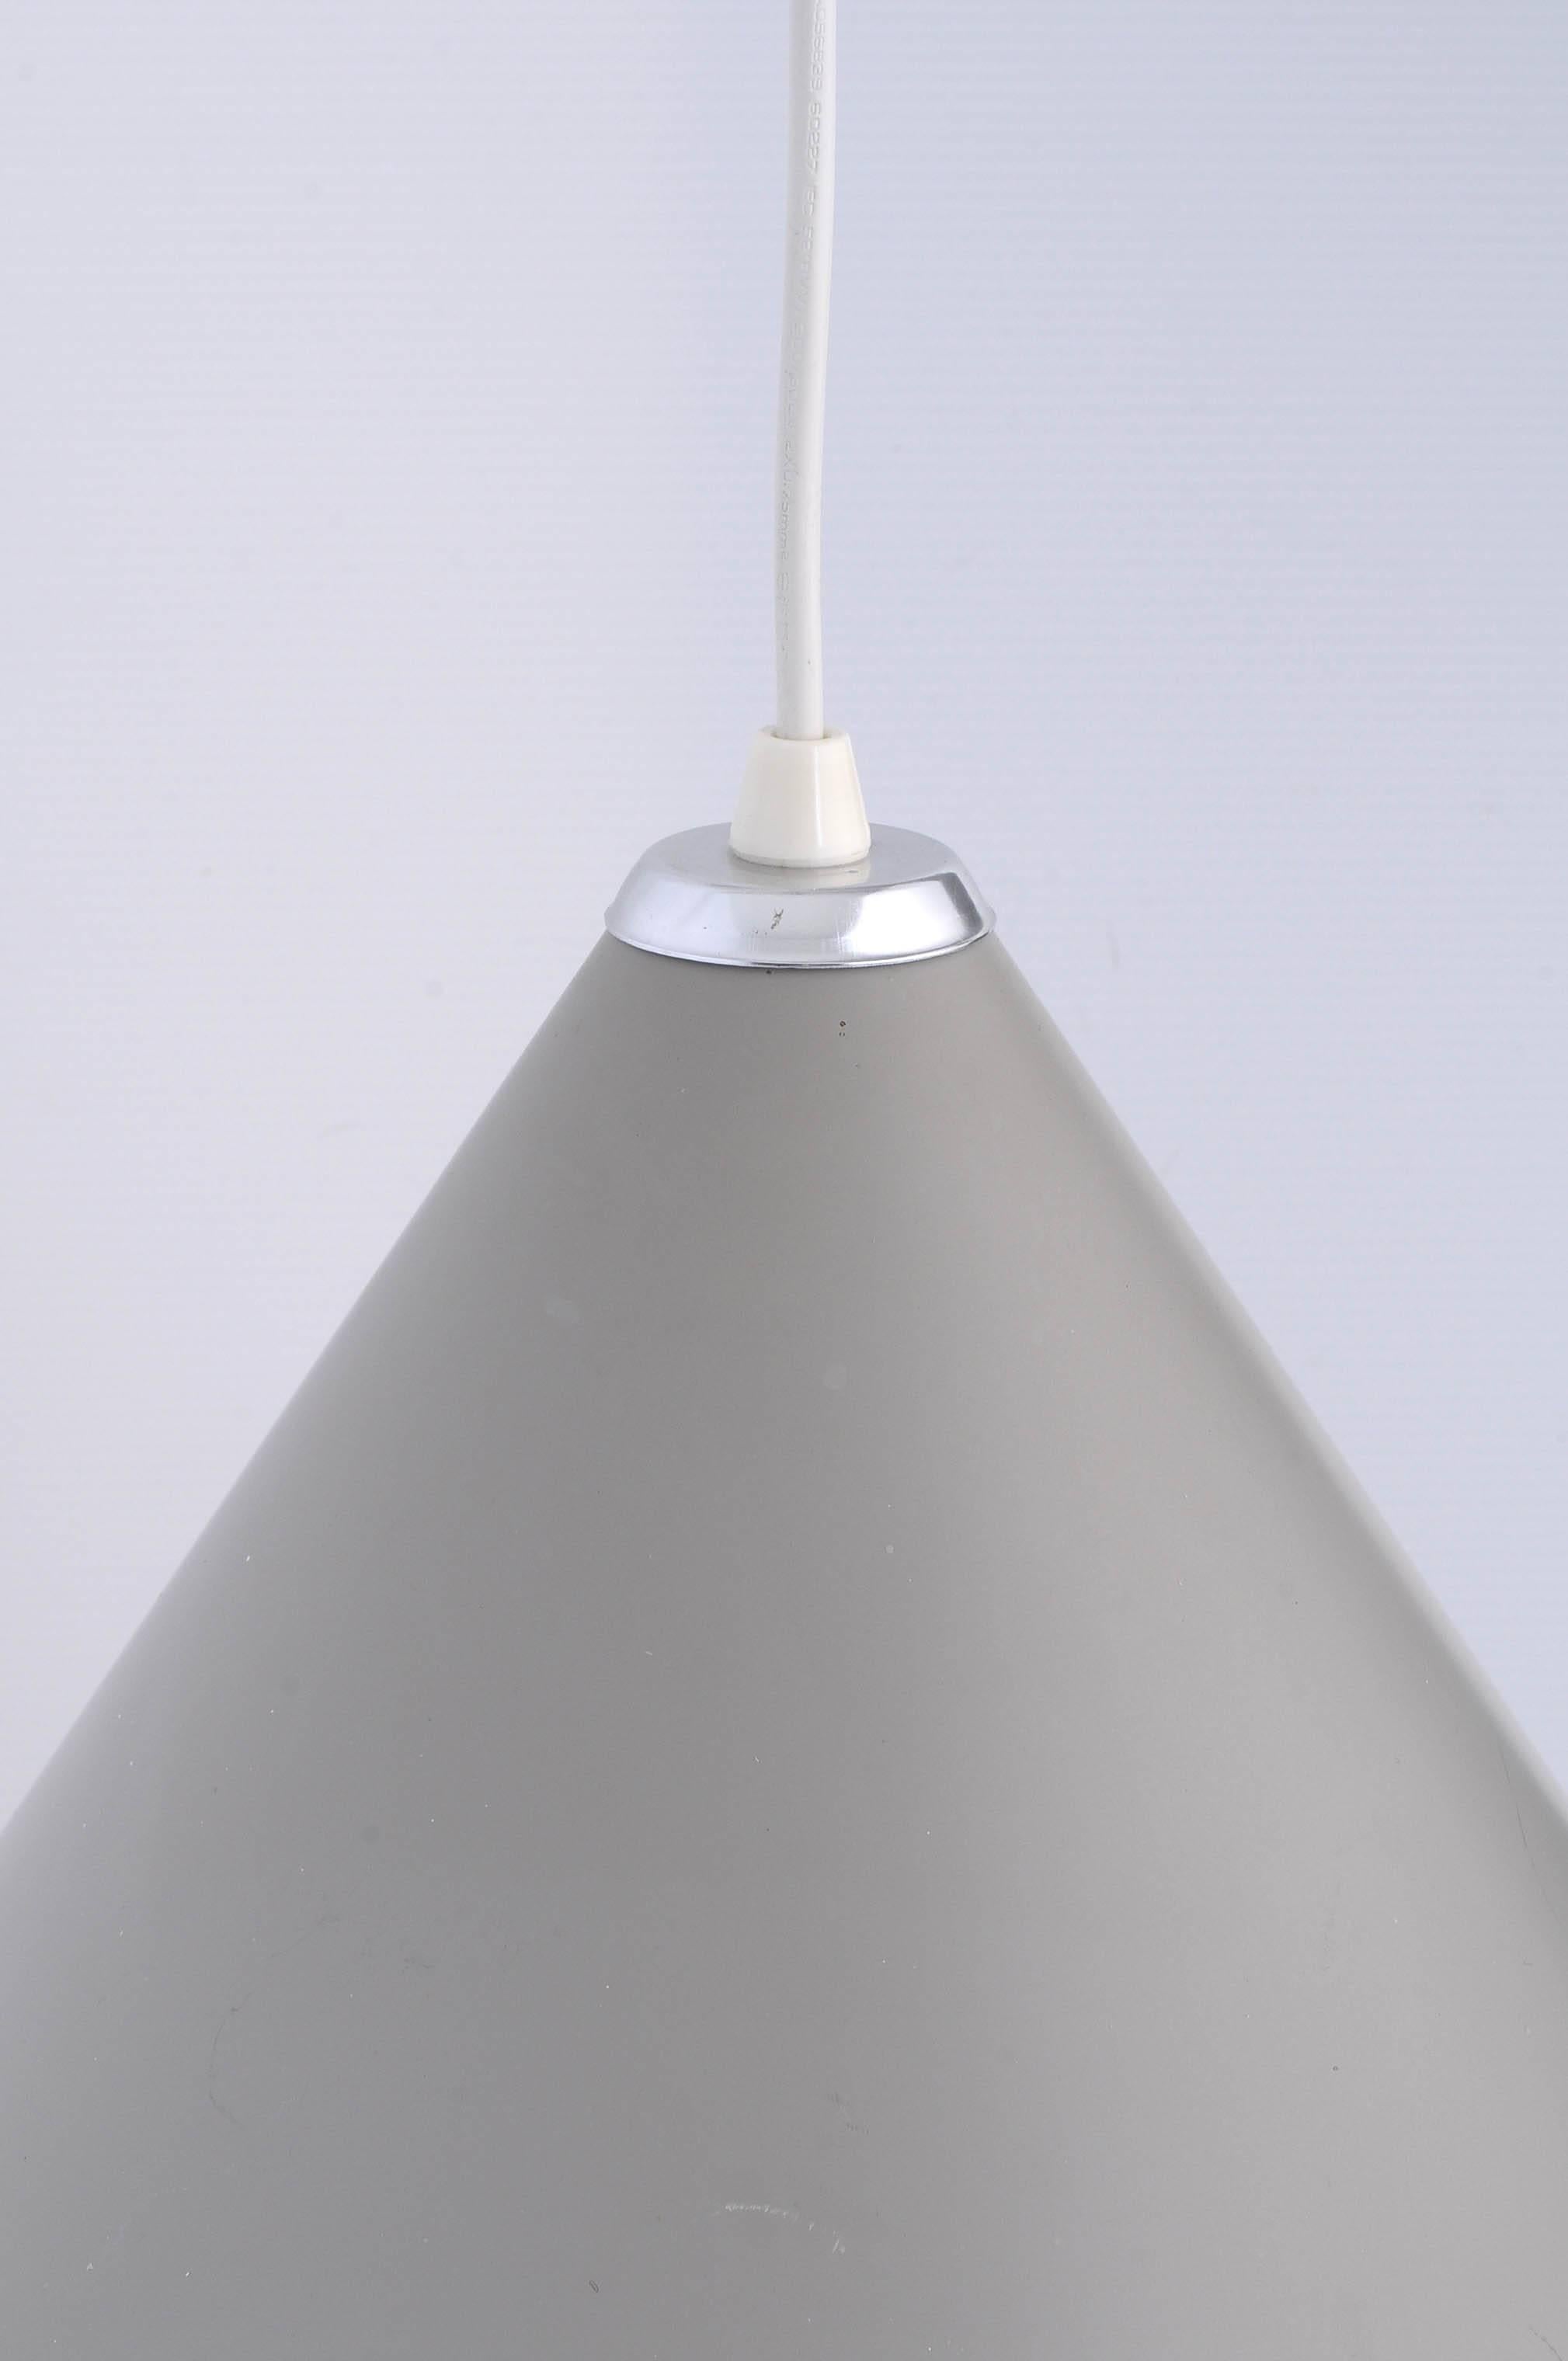 Scandinavian lamp designer Bent Karlby for Lyfa
Grey color. The lamp has height adjustment.
The lamp is after renovation, cleaned. On the lamp are white dots of another white paint.
The electric cable is new.